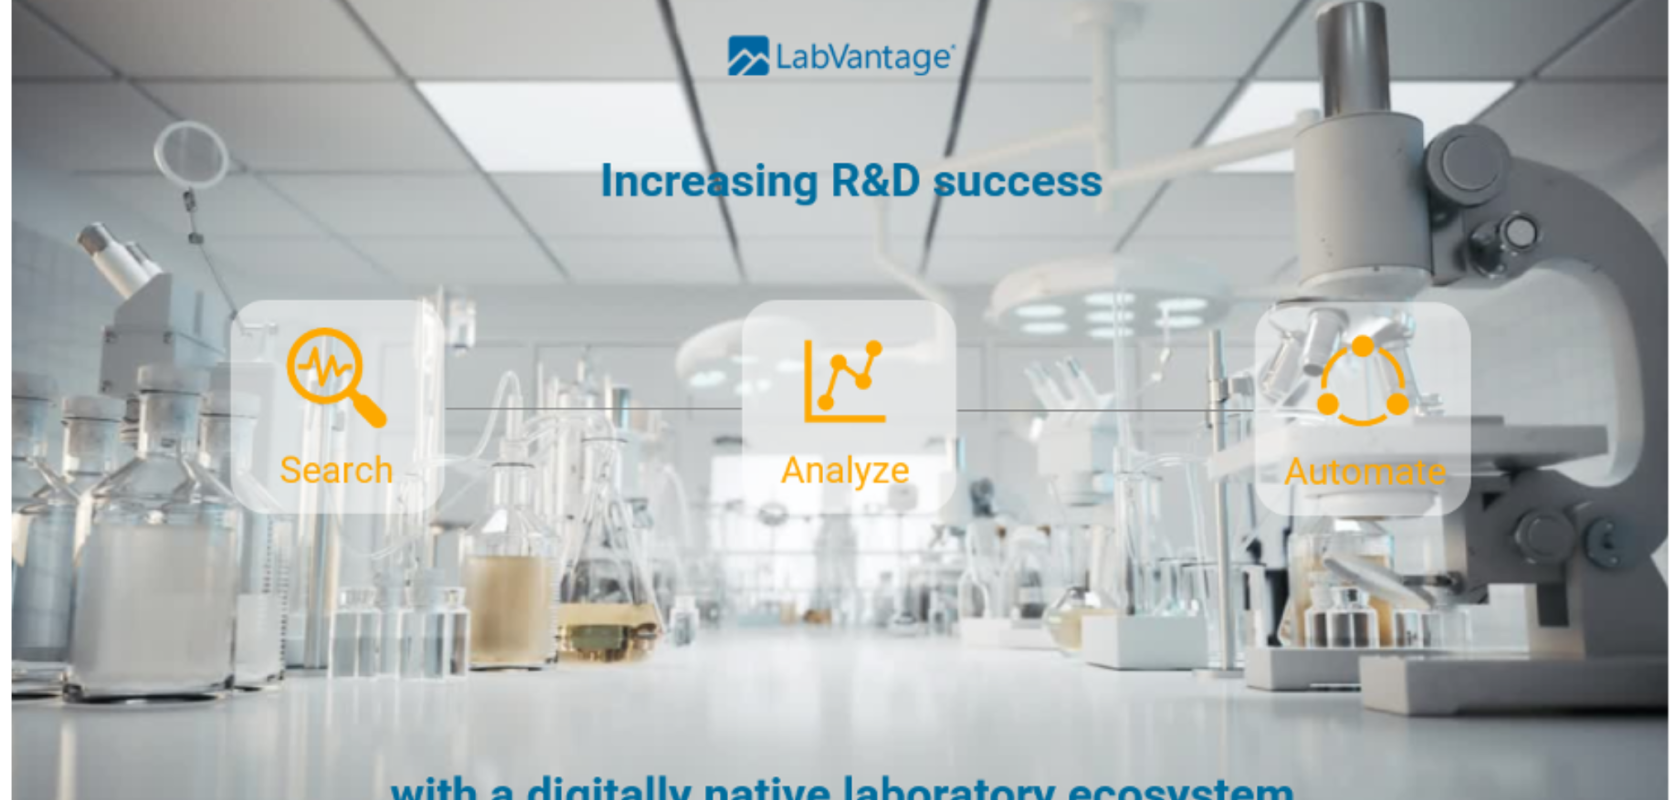 Microscopes in a lab with Labvantage logo